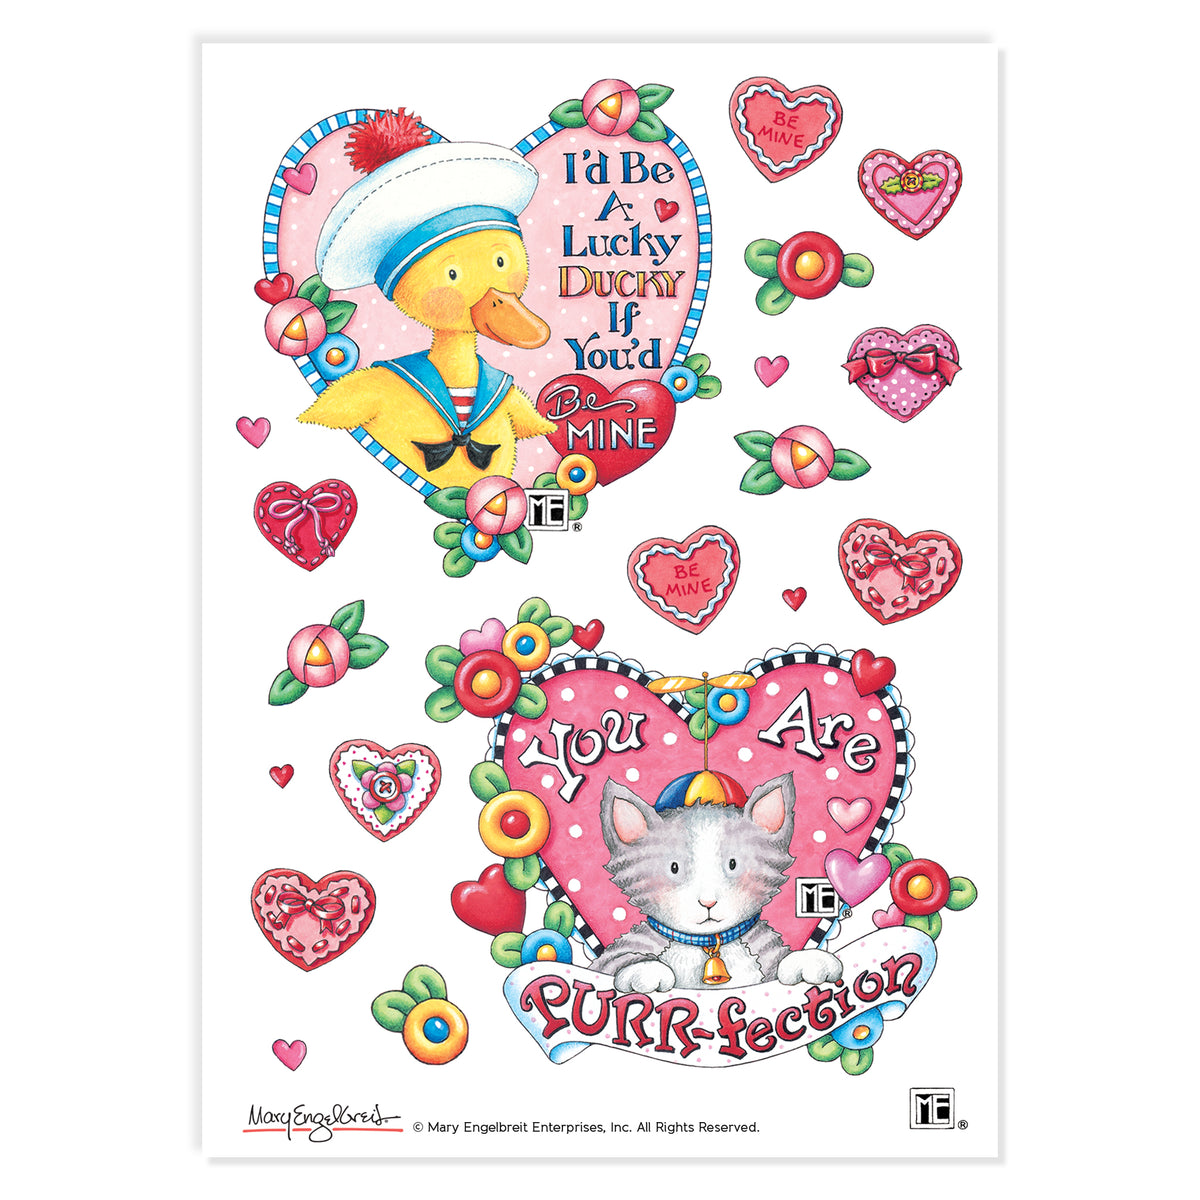 Mary Engelbreit Valentine Stickers - 112 Stickers, Two 8-1/2 x 11 Sheets,  Great for Teachers, Students, Scrapbooking, DIY Arts and Crafts, Gift Wrap